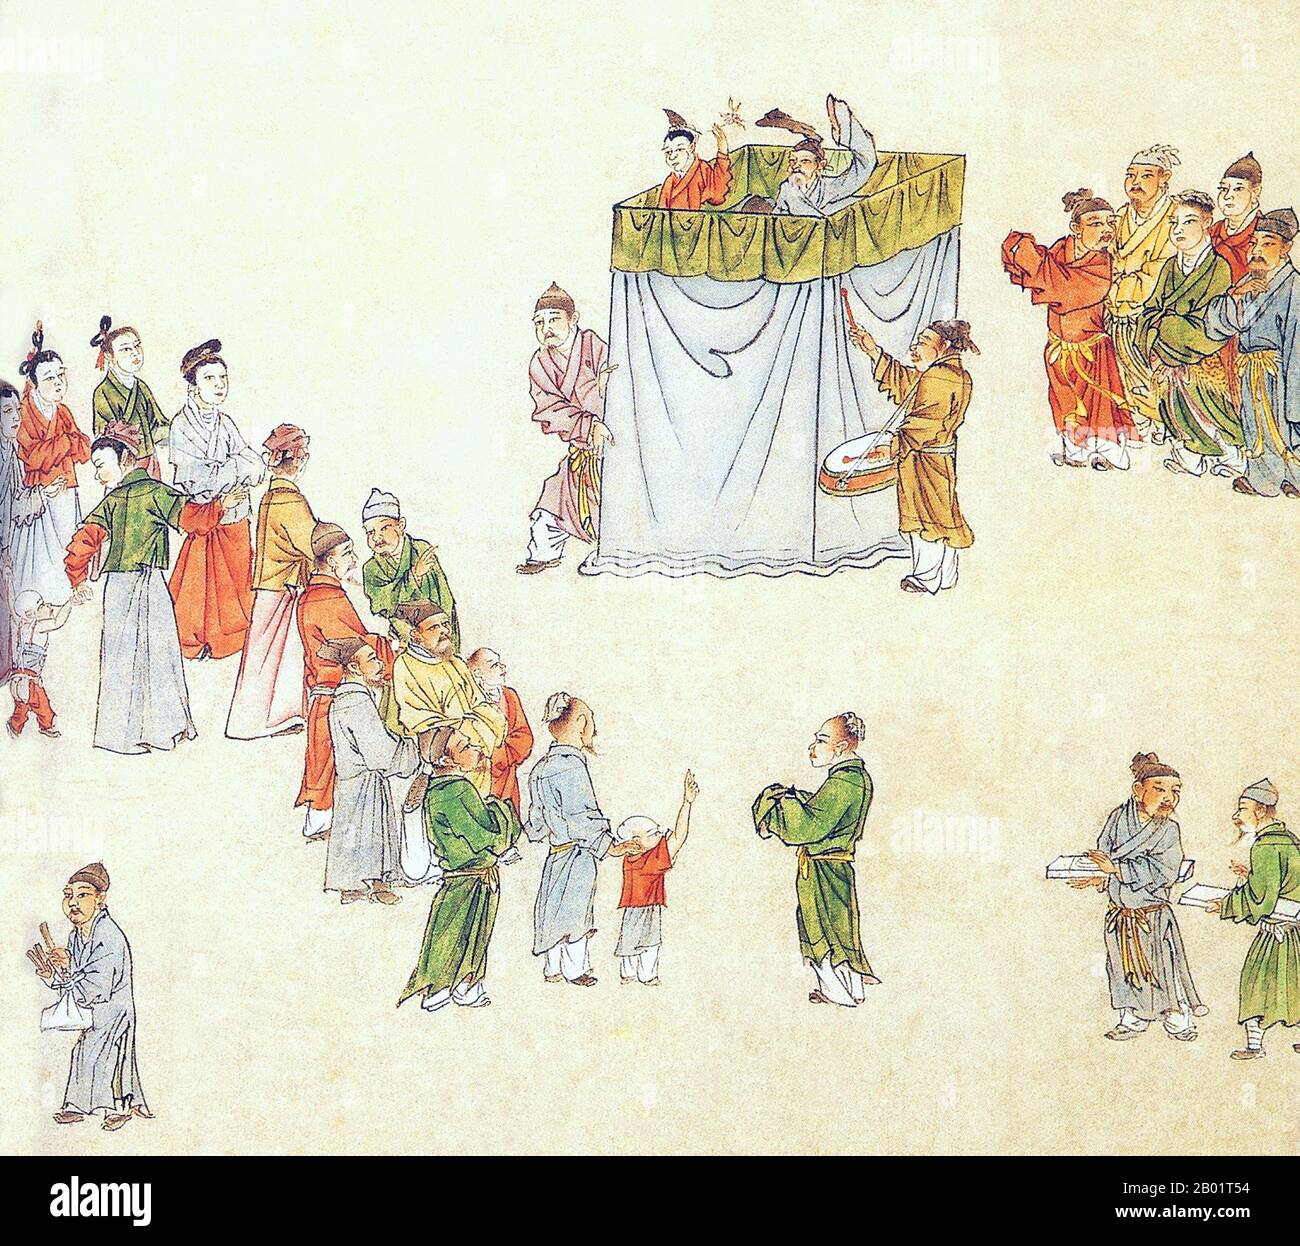 China: A puppet show draws an audience. Yuan Dynasty handscroll painting, 14th century.  Story-tellers and puppeteers in China entertained city-dwellers with much the same stories that playwrights worked into their dramatic texts. Detail from a fourteenth-century handscroll in ink and colour on paper. Stock Photo